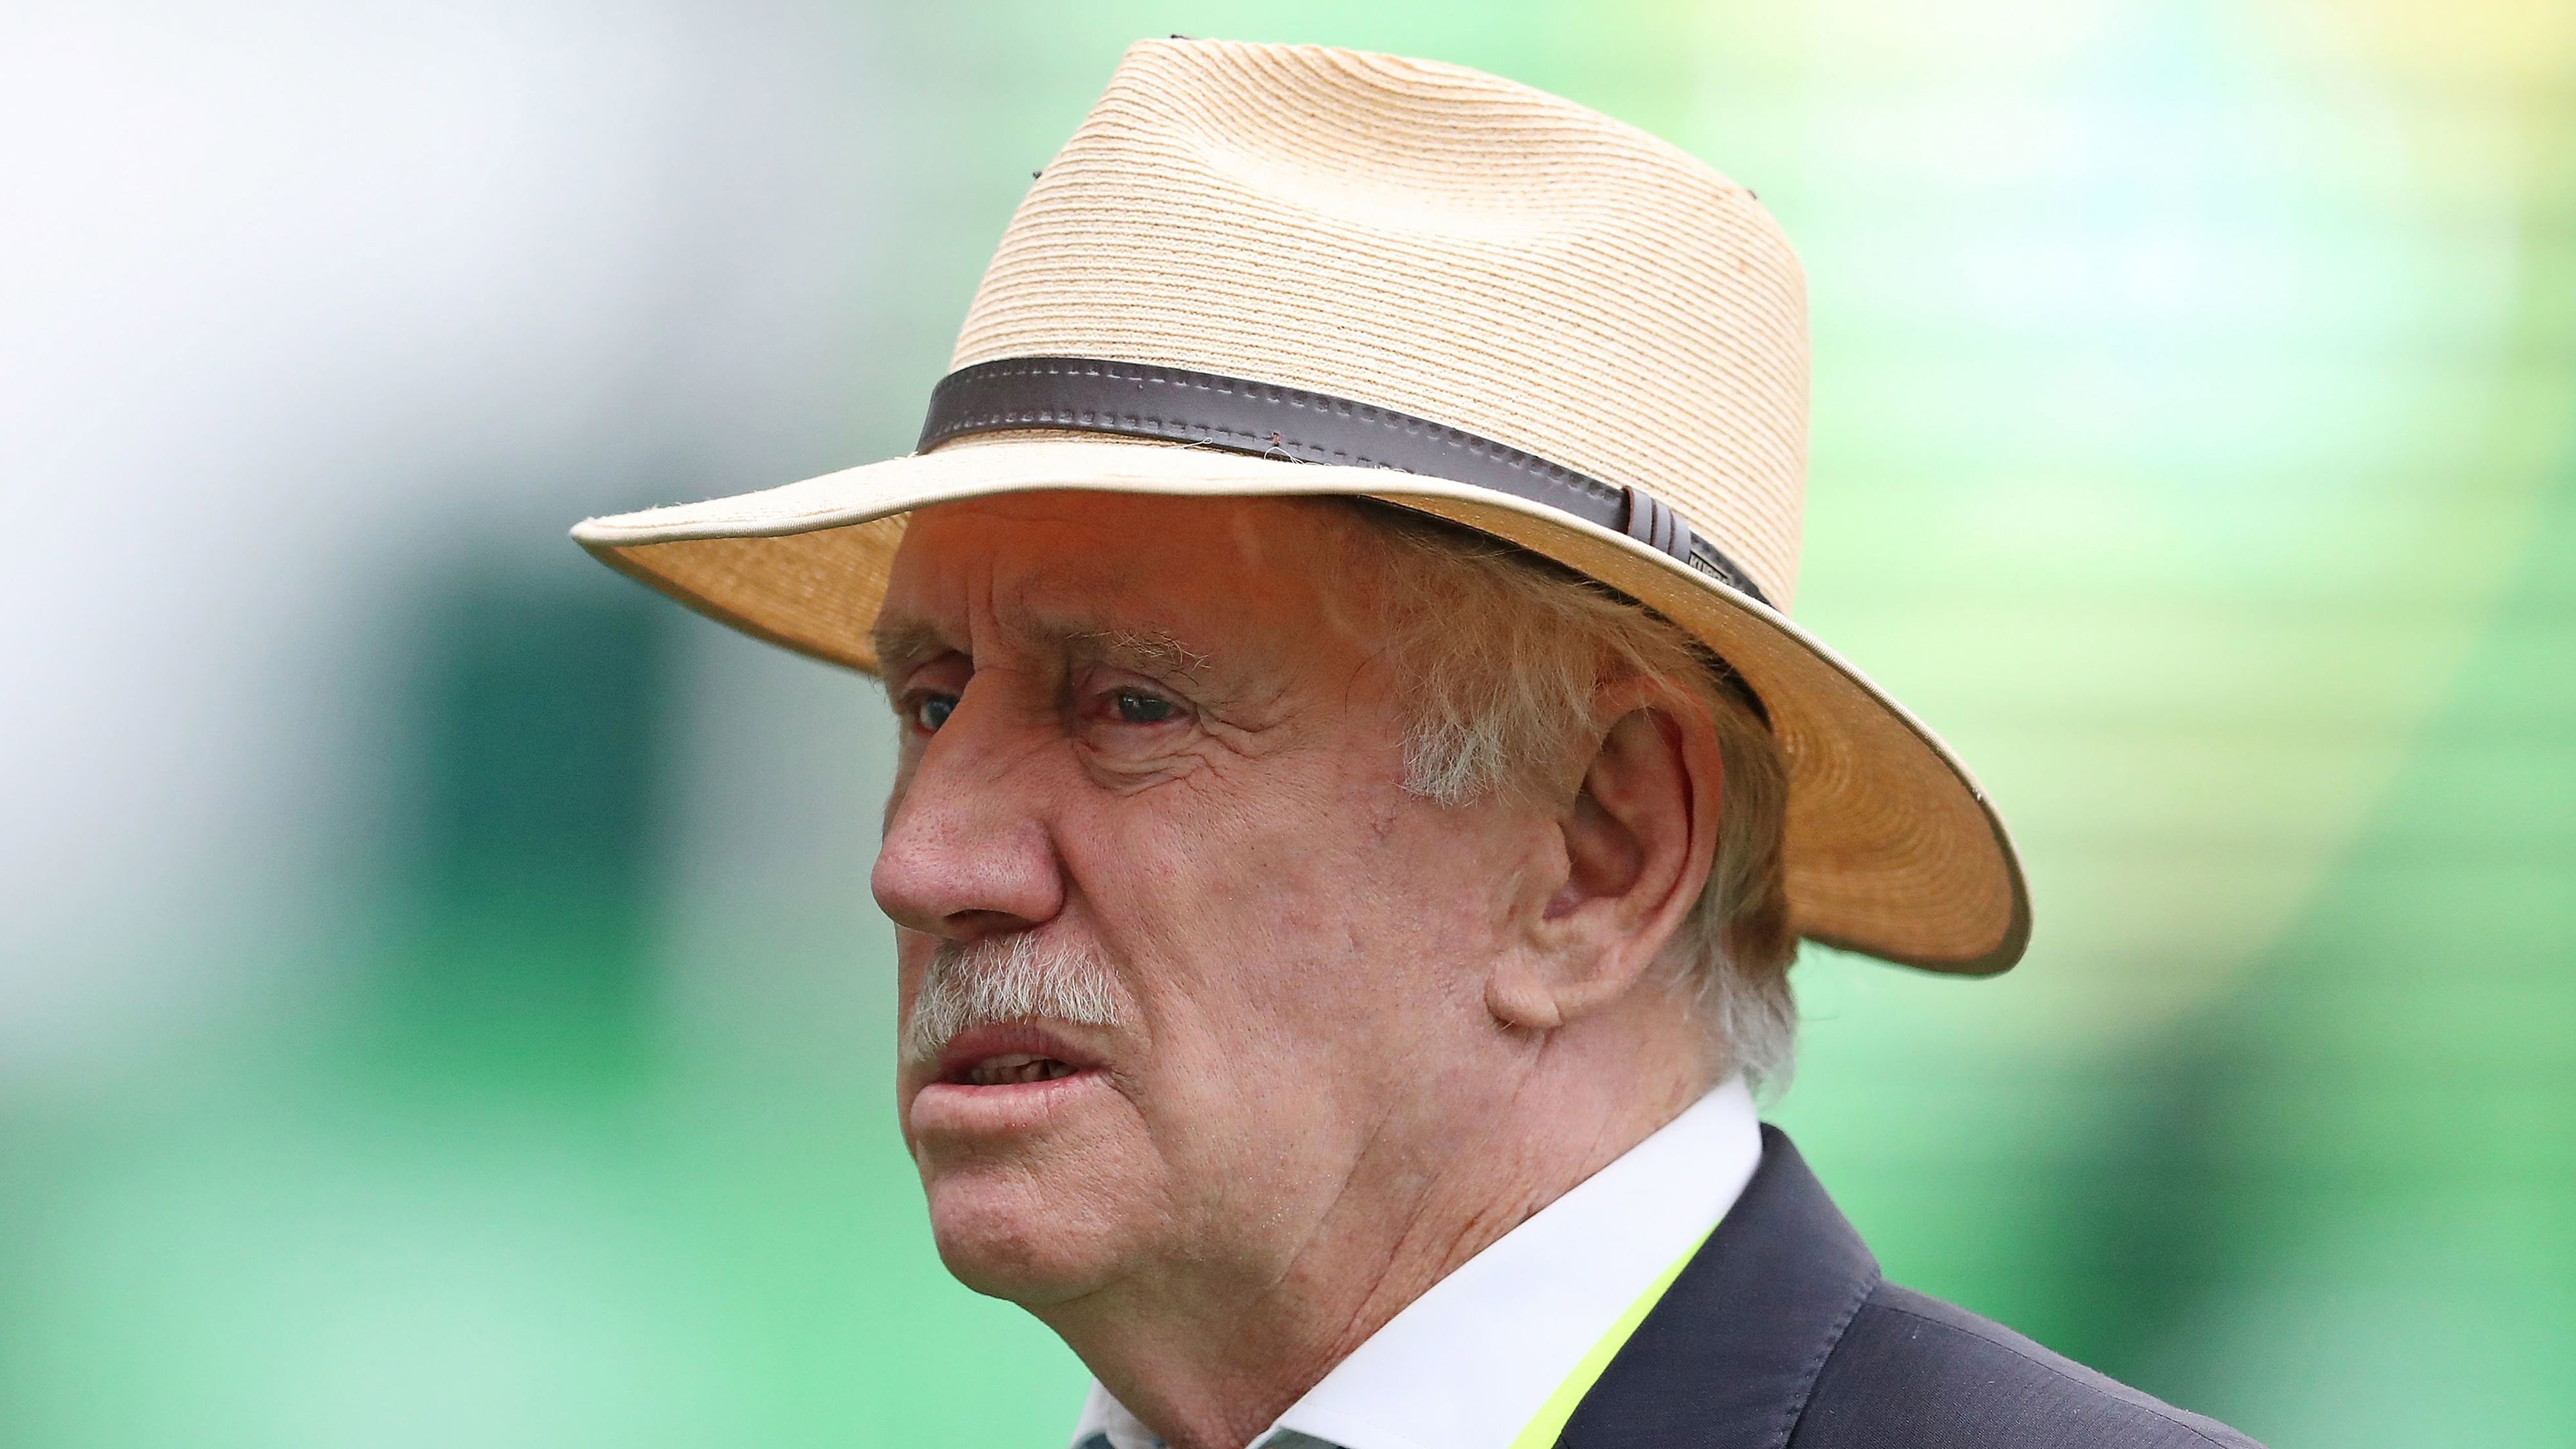 Former Australian captain Ian Chappell during day three of the Second Test match between Australia and Pakistan at Melbourne Cricket Ground on December 28, 2016 in Melbourne, Australia.